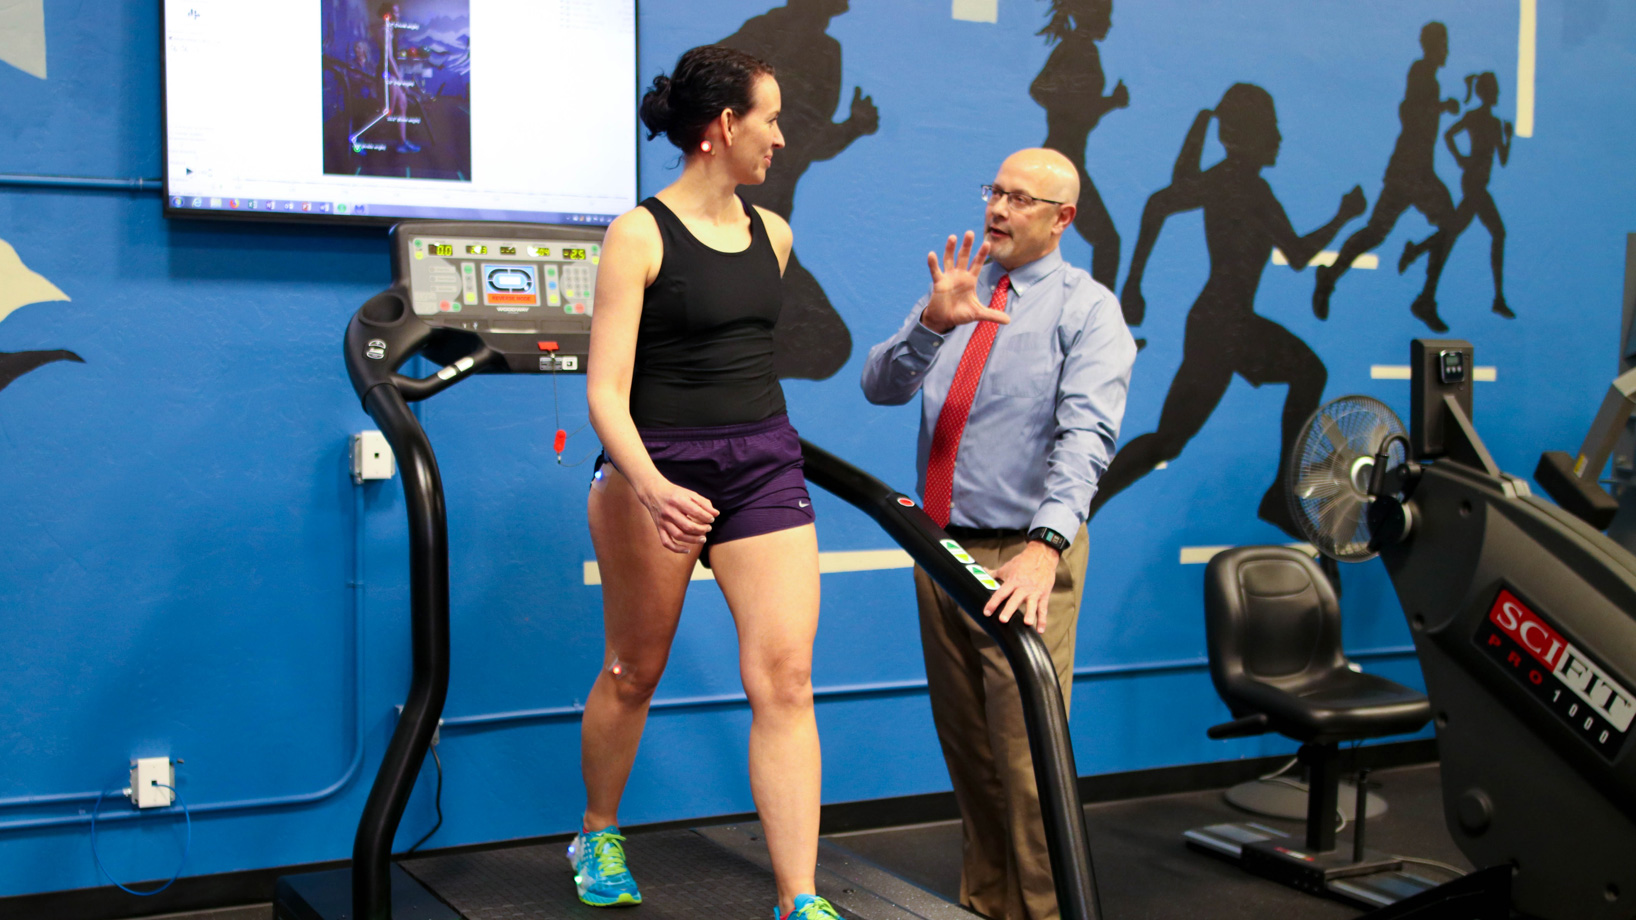 Women in Treadmills while talking to a Physical Therapist